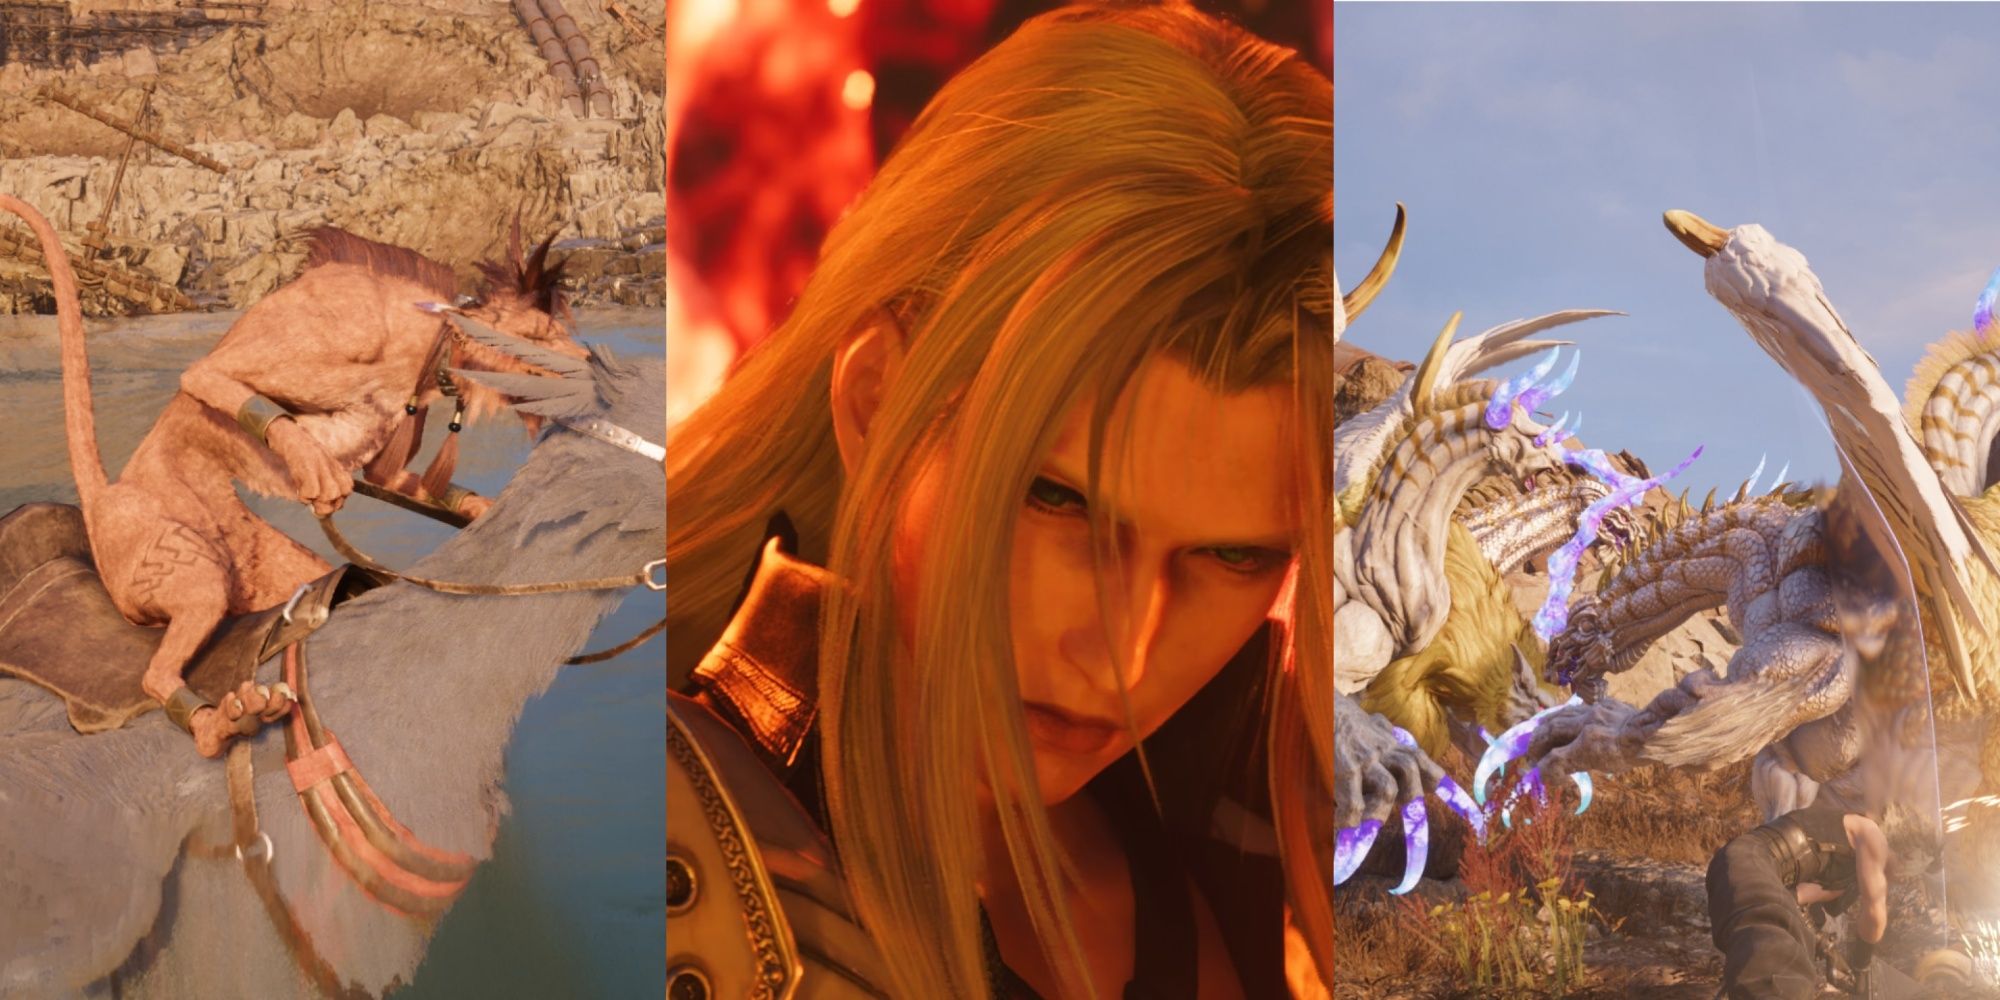 Final Fantasy 7 Rebirth Red XIII Riding a Chocobo, Sephiroth engulfed in flames, and Cloud battling Fiends